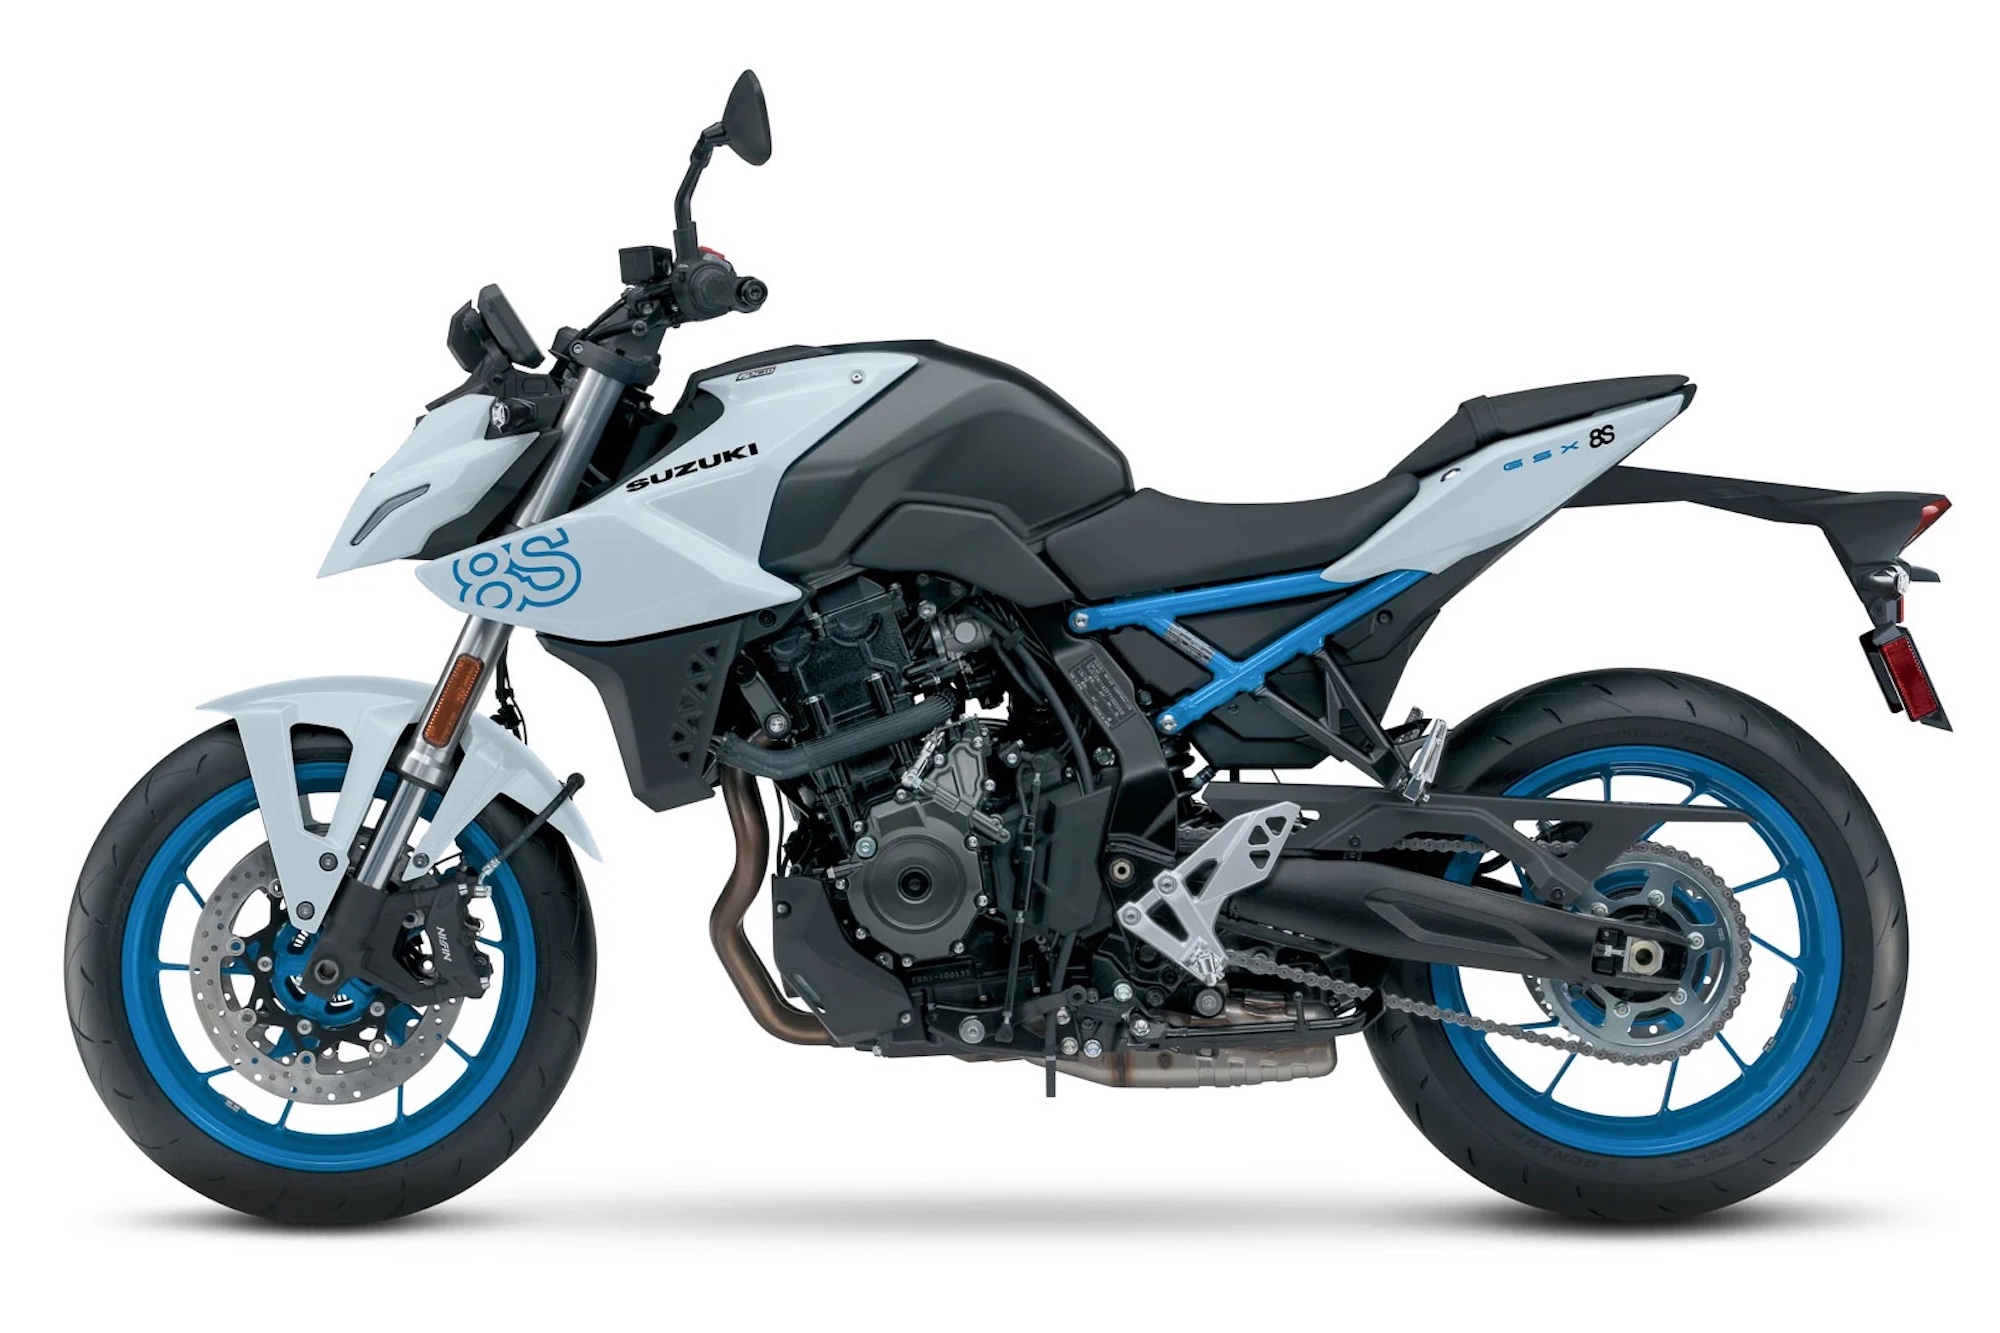 Meet the newest addition to Suzuki’s GSX line: The GSX-8S. Media sourced from Ultimate Motorcycling.